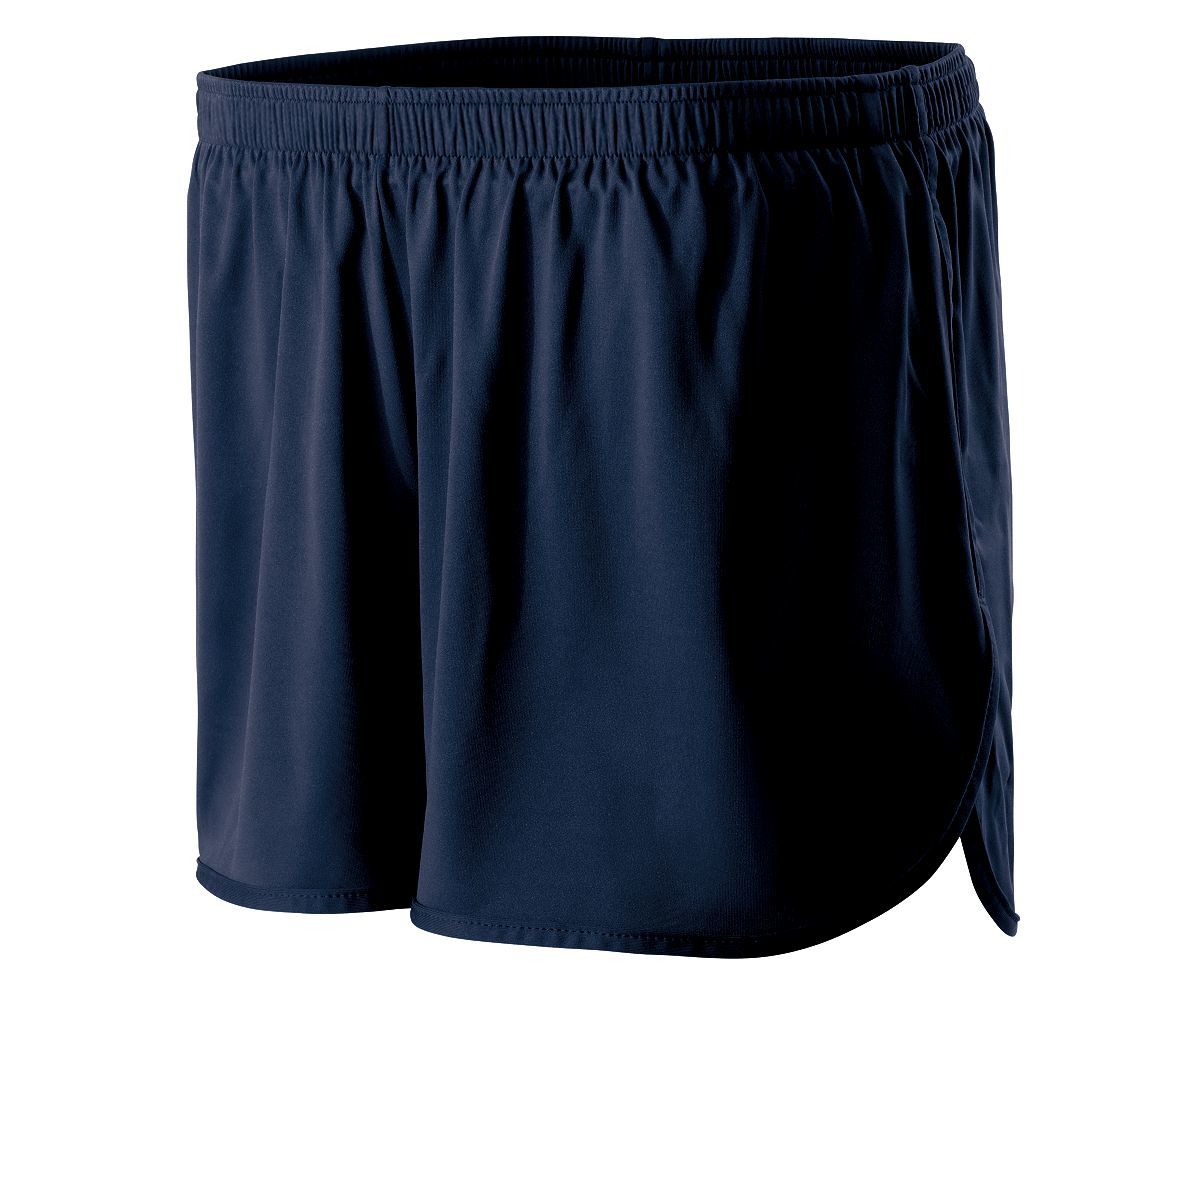 Holloway Anchor Shorts in True Navy  -Part of the Adult, Adult-Shorts, Track-Field, Holloway product lines at KanaleyCreations.com